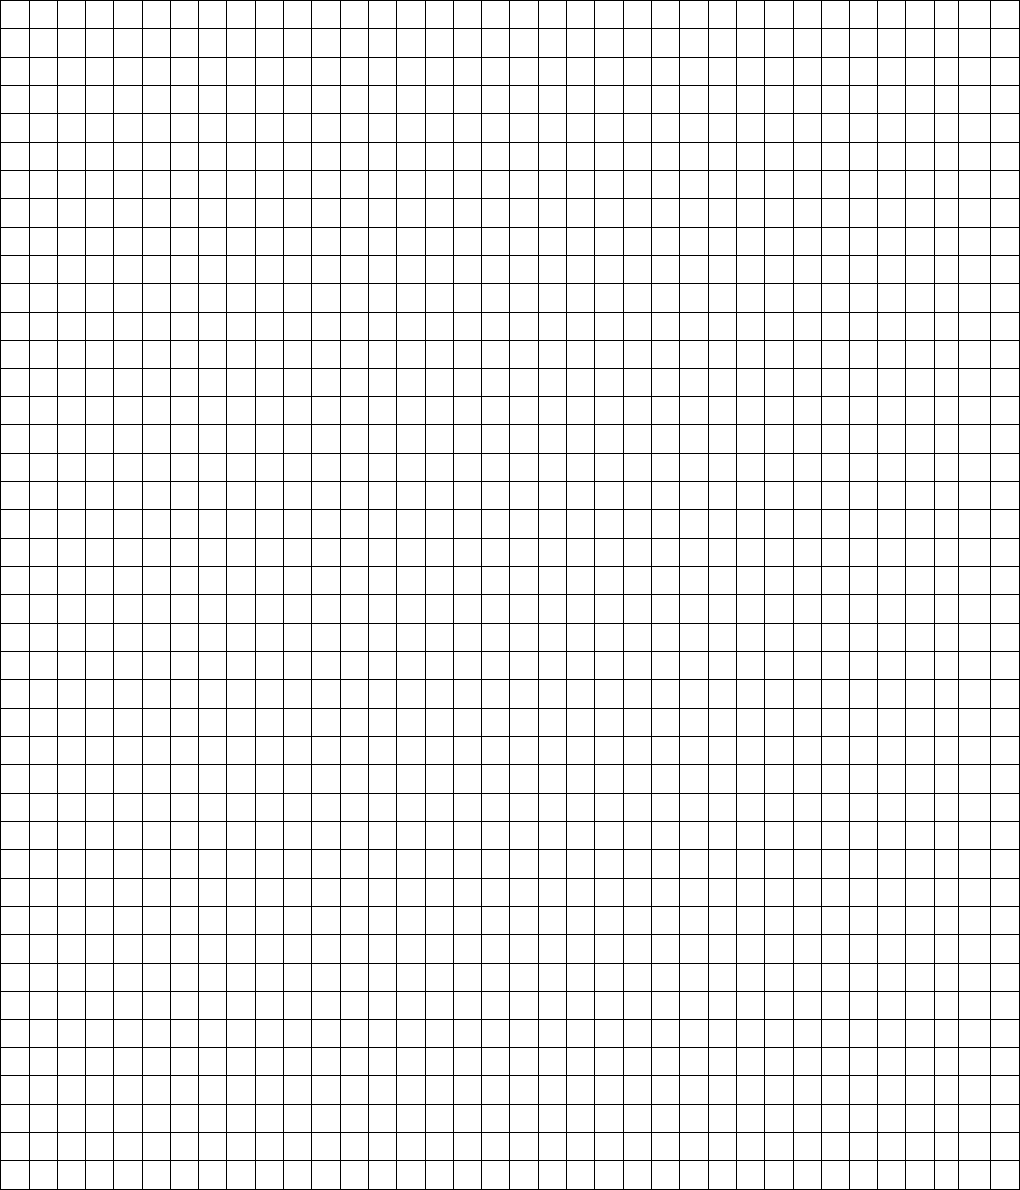 05 cm grid paper template in word and pdf formats